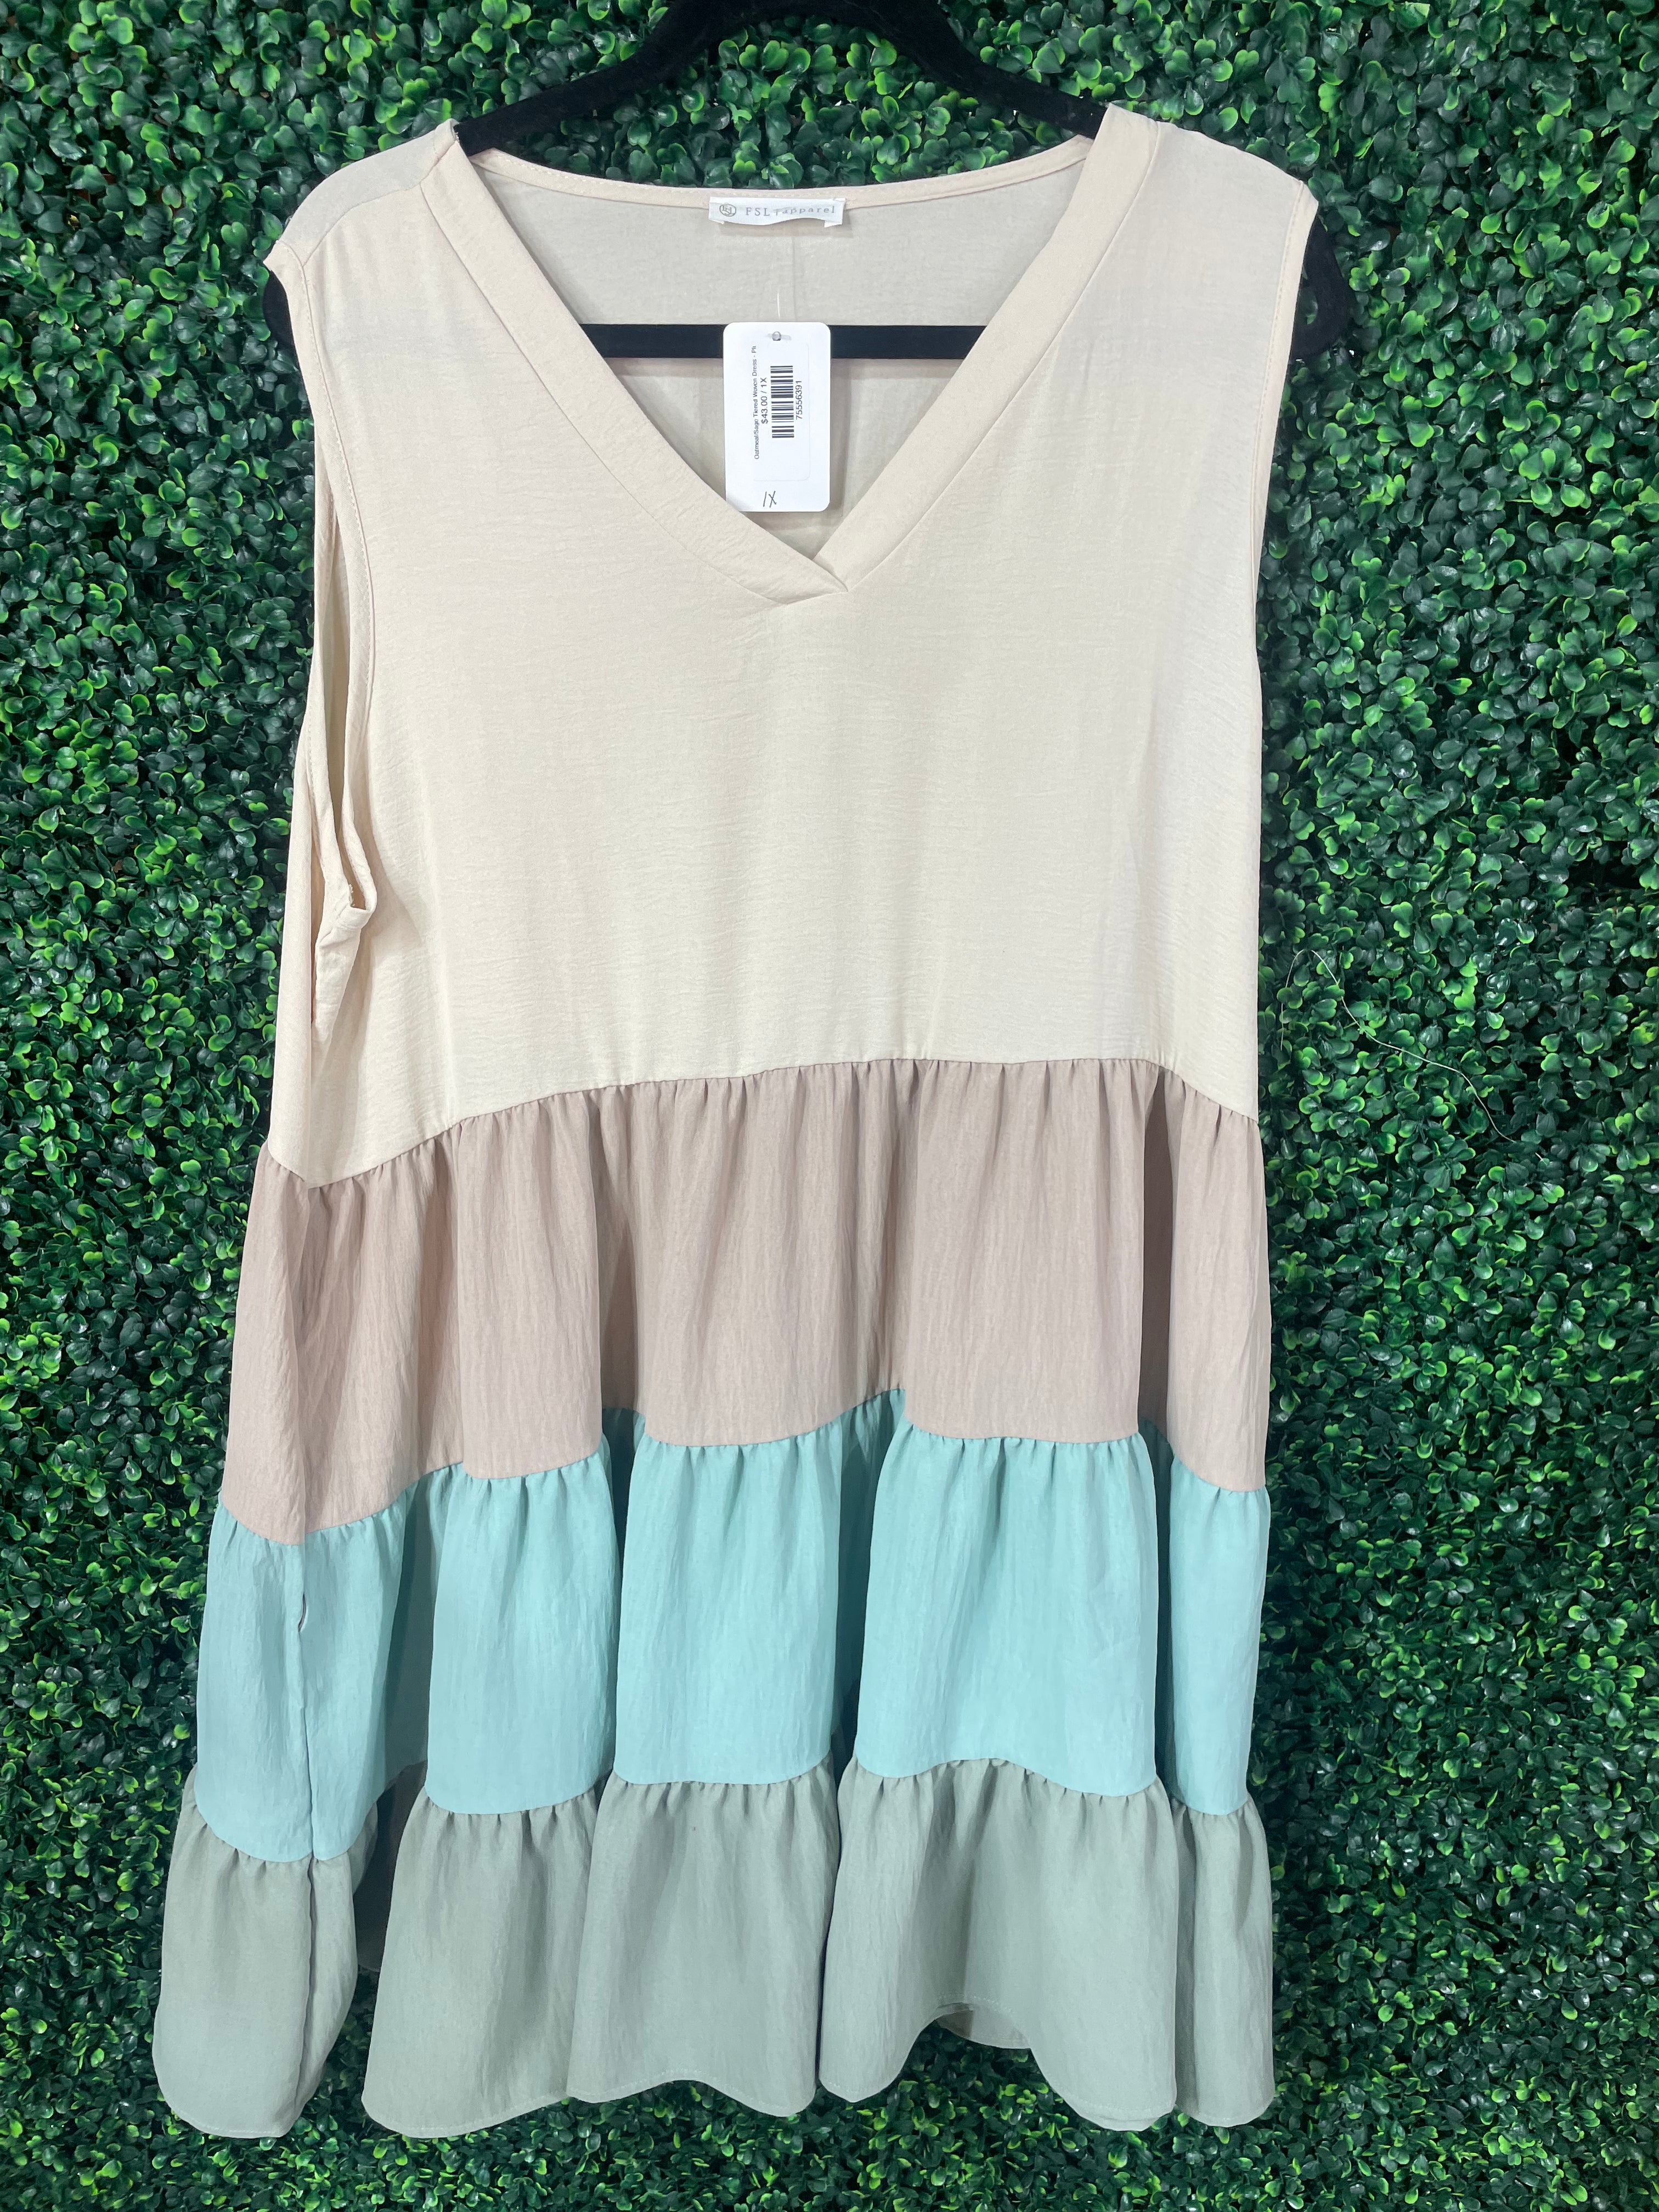 Oatmeal/Sage Tiered Woven Dress - Plus